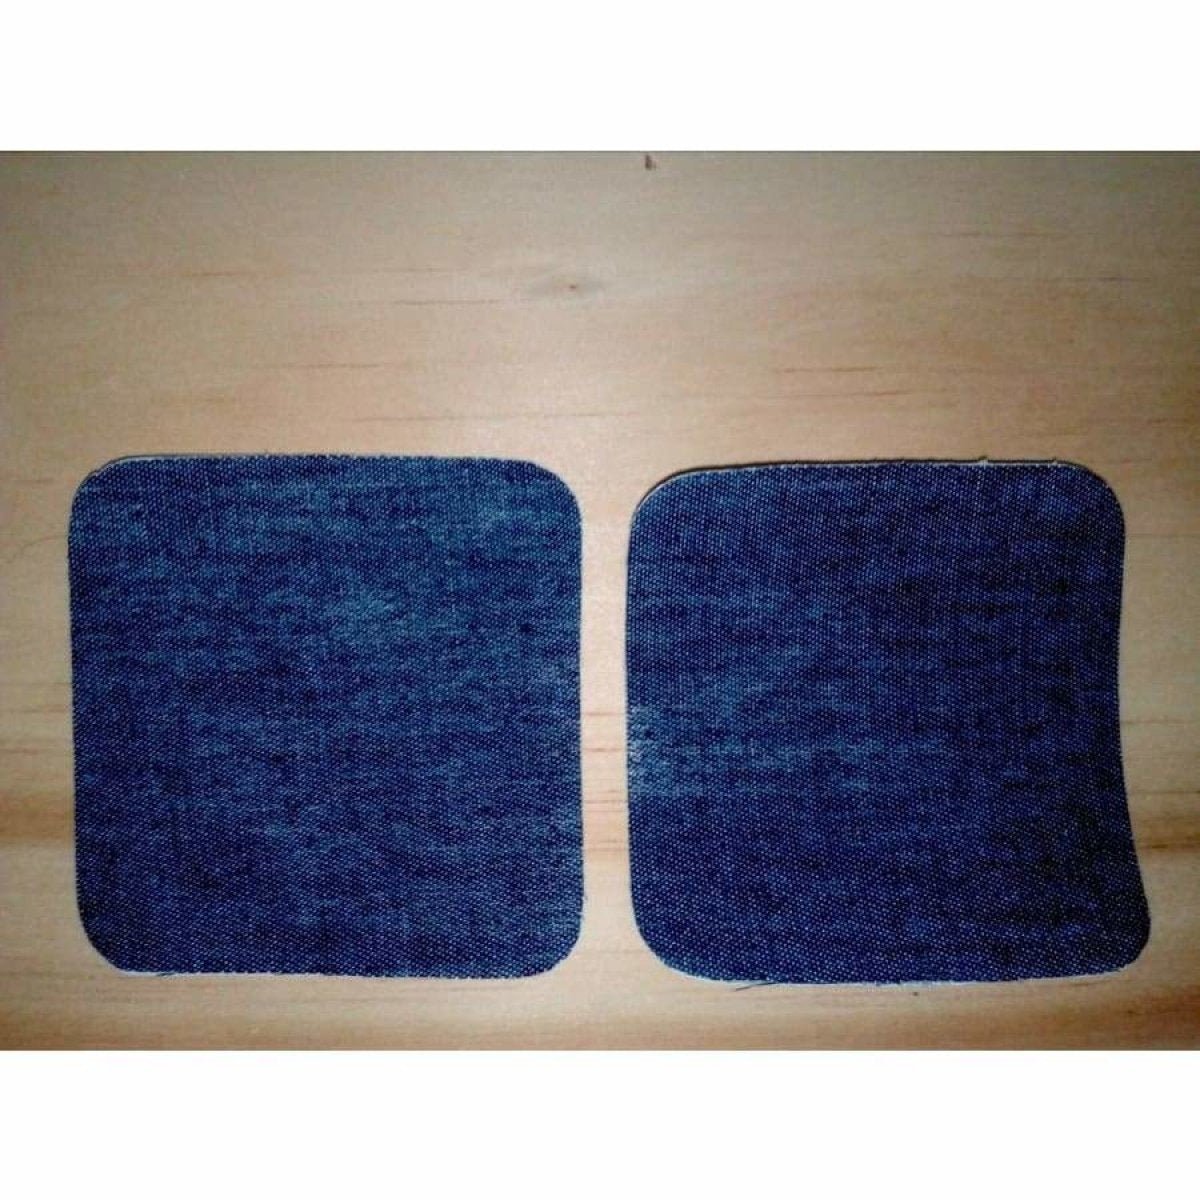 2pcs Iron-on Fabric Blue Black Denim Jeans Clothing Jacket Patch Patches Repair Sewing Shapes - 7.5x7.5cm Blue C - - Asia Sell